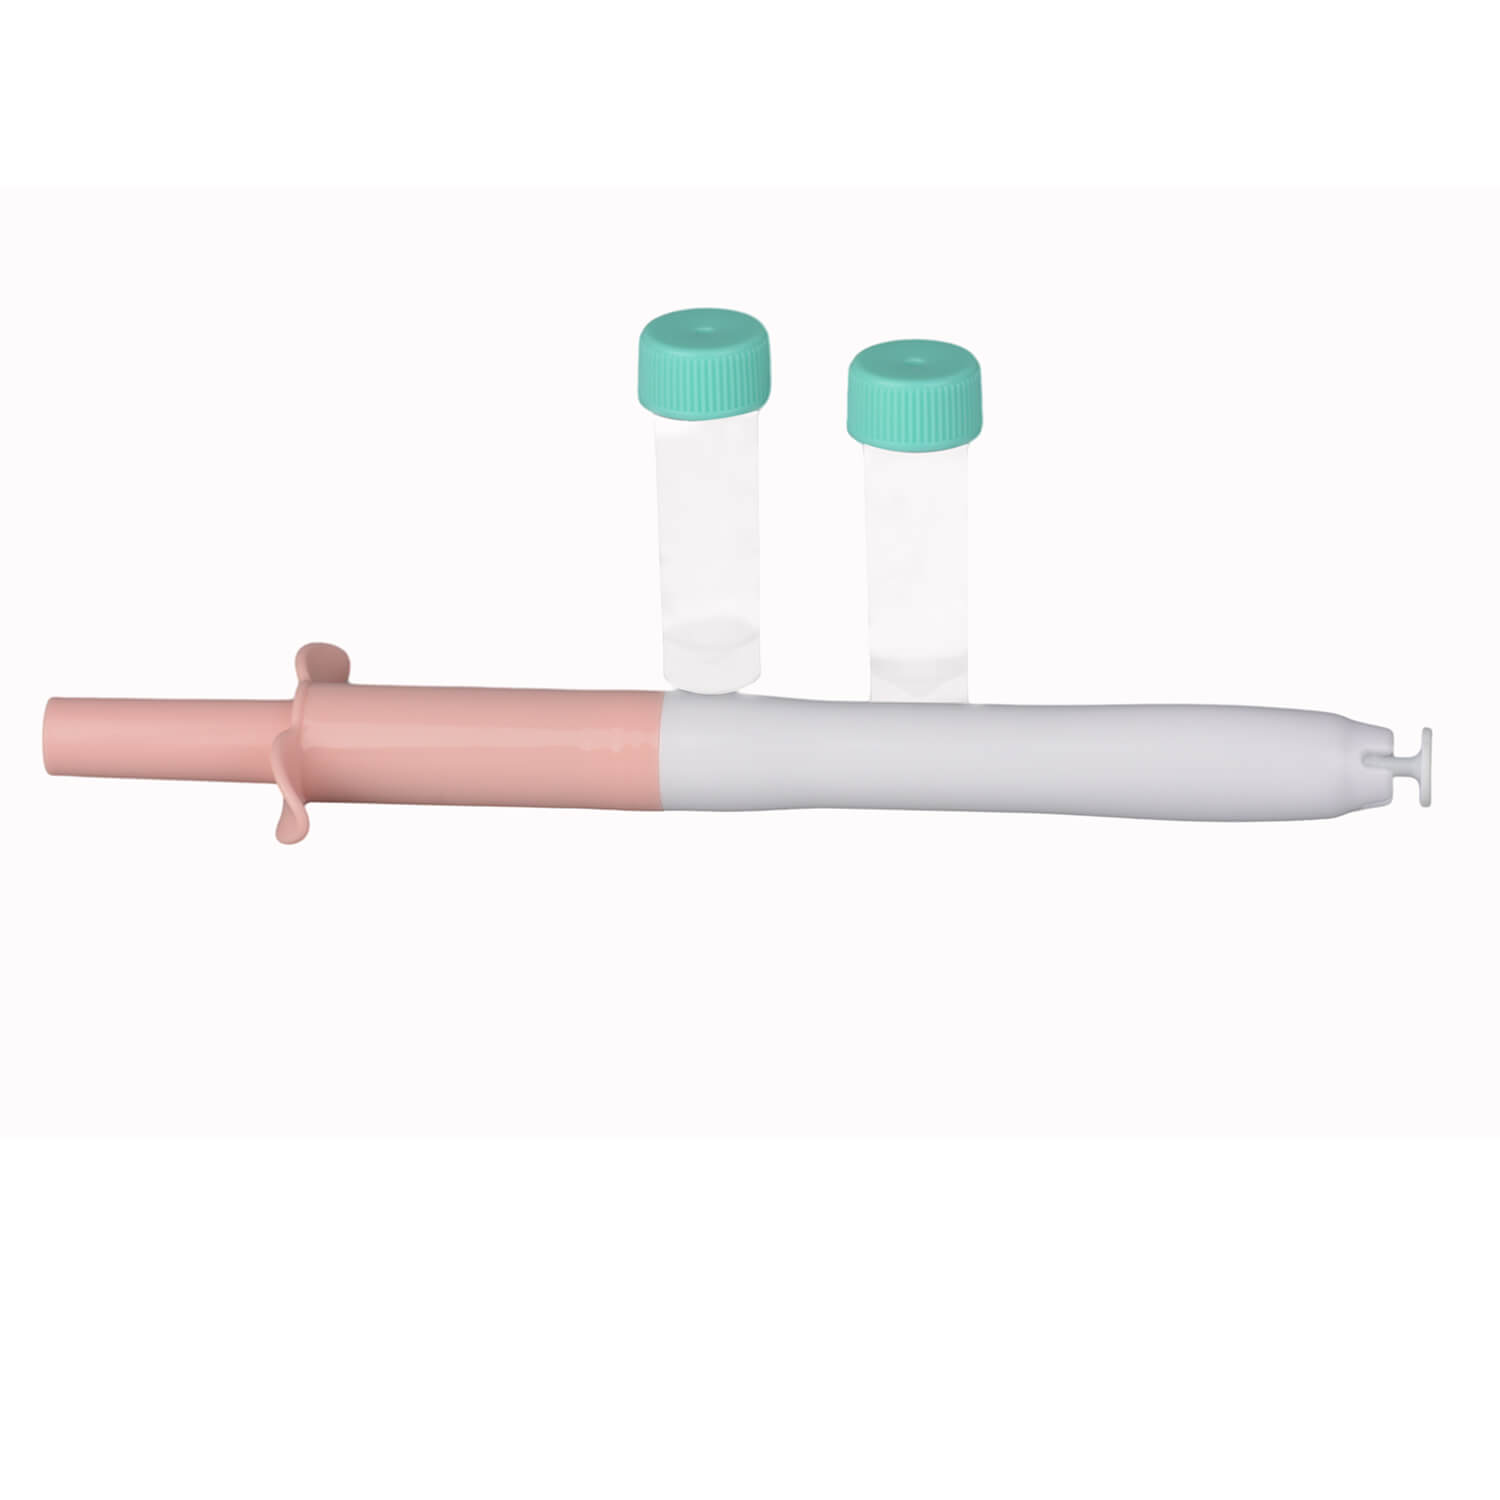 HPV Self-Collection Kit (Cervical Swab)